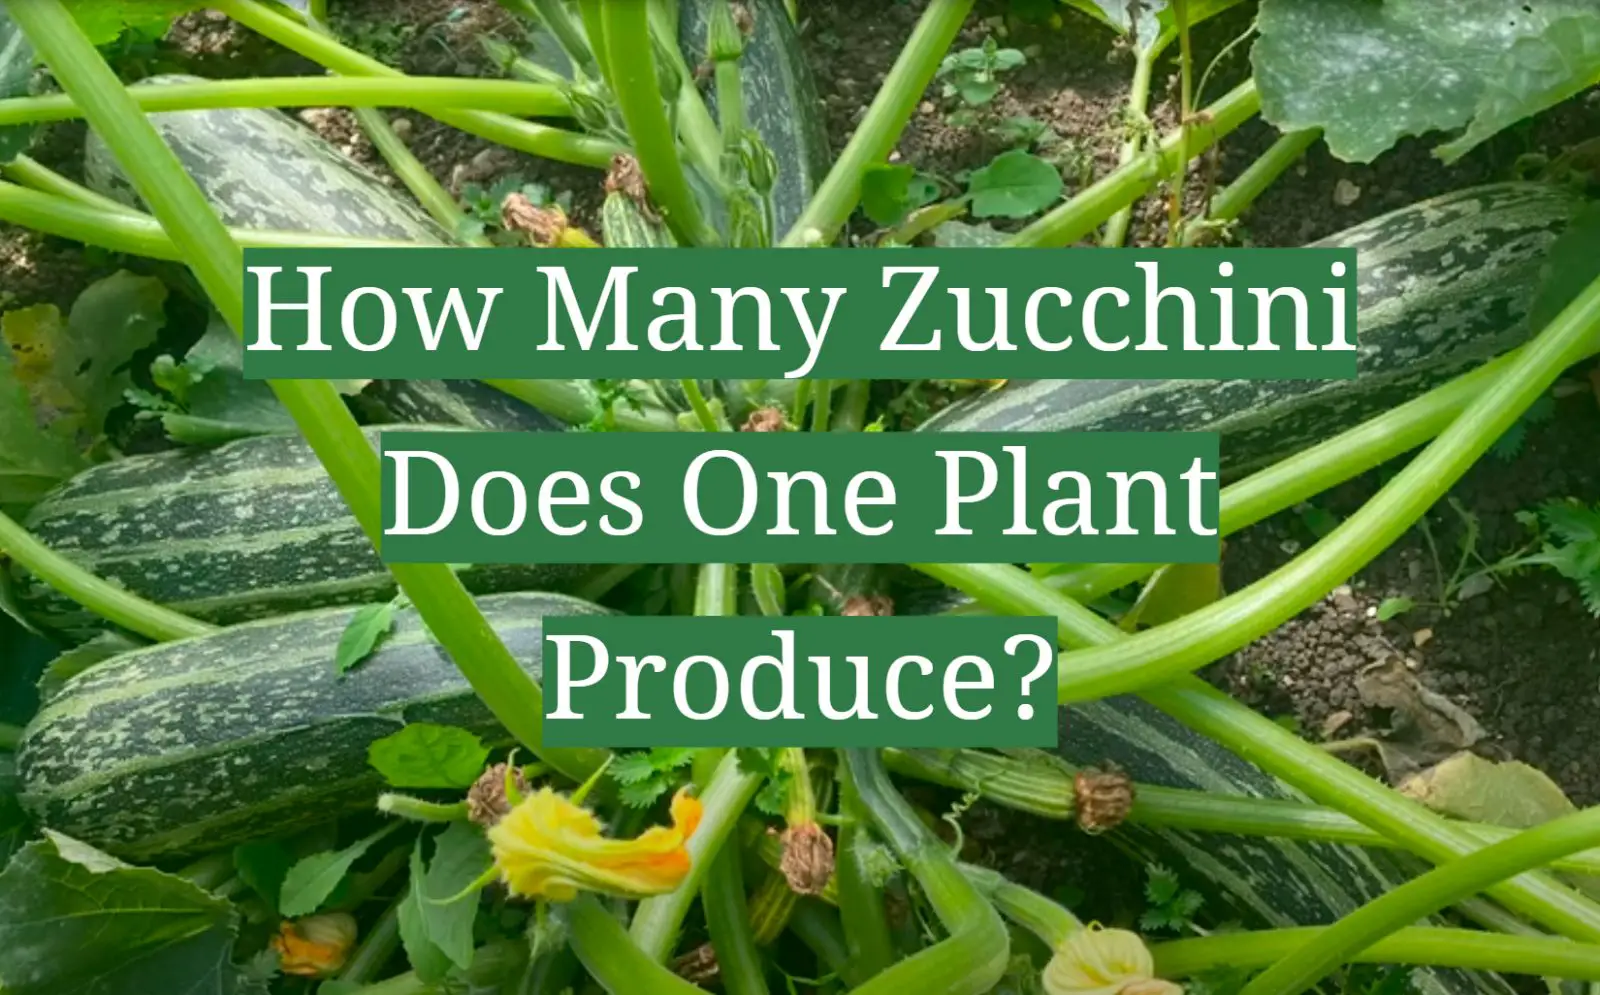 How Many Zucchini Does One Plant Produce?